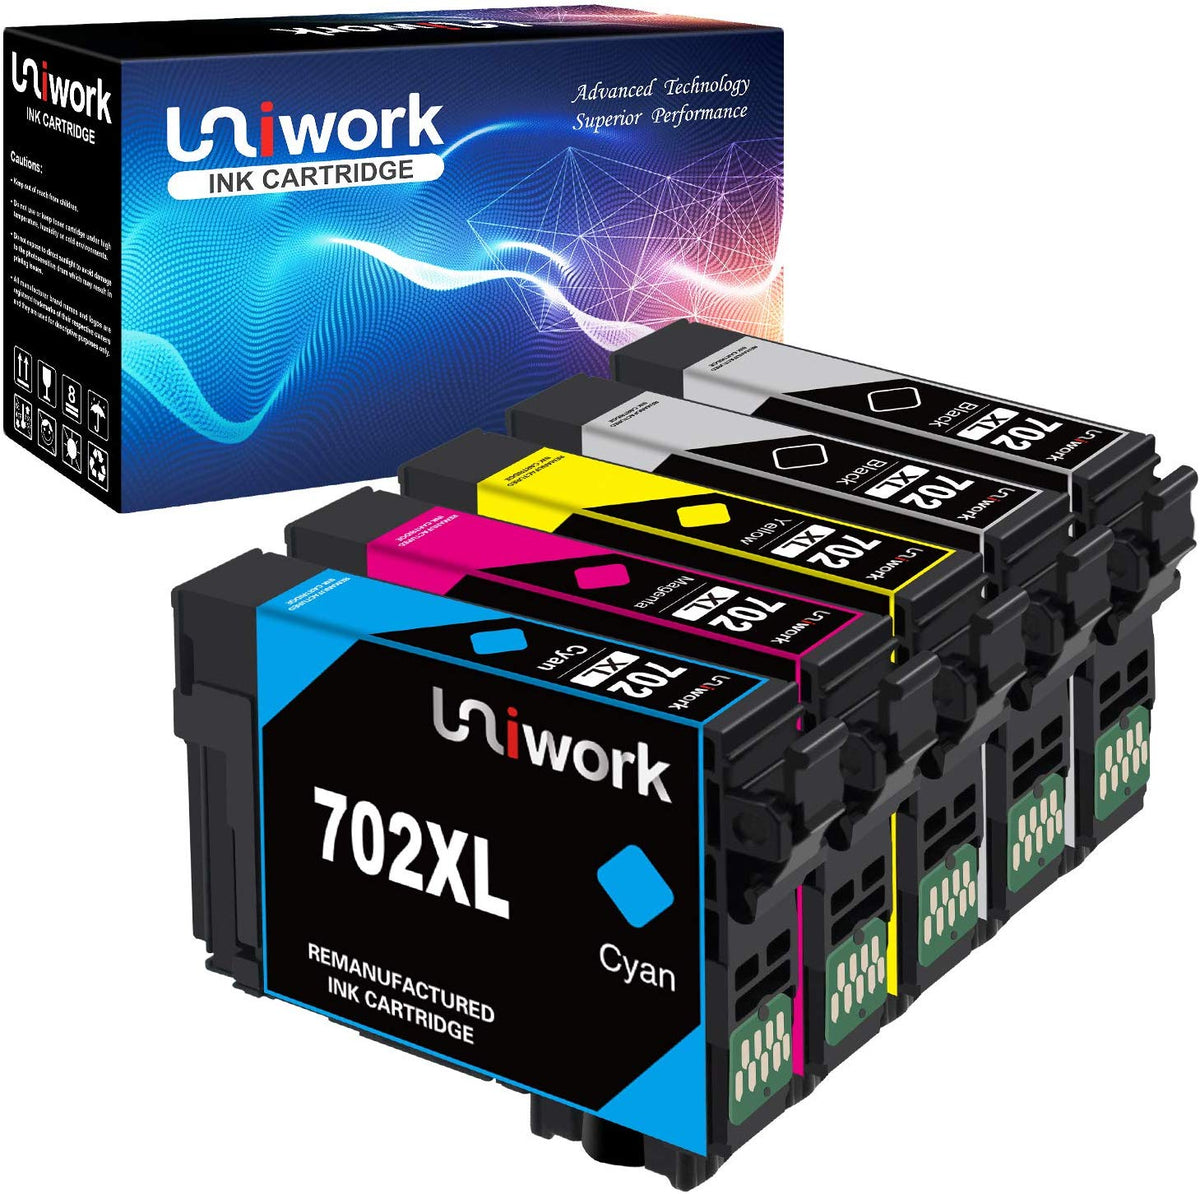 Uniwork Remanufactured Ink Cartridges Replacement For Epson 702 702xl 3986